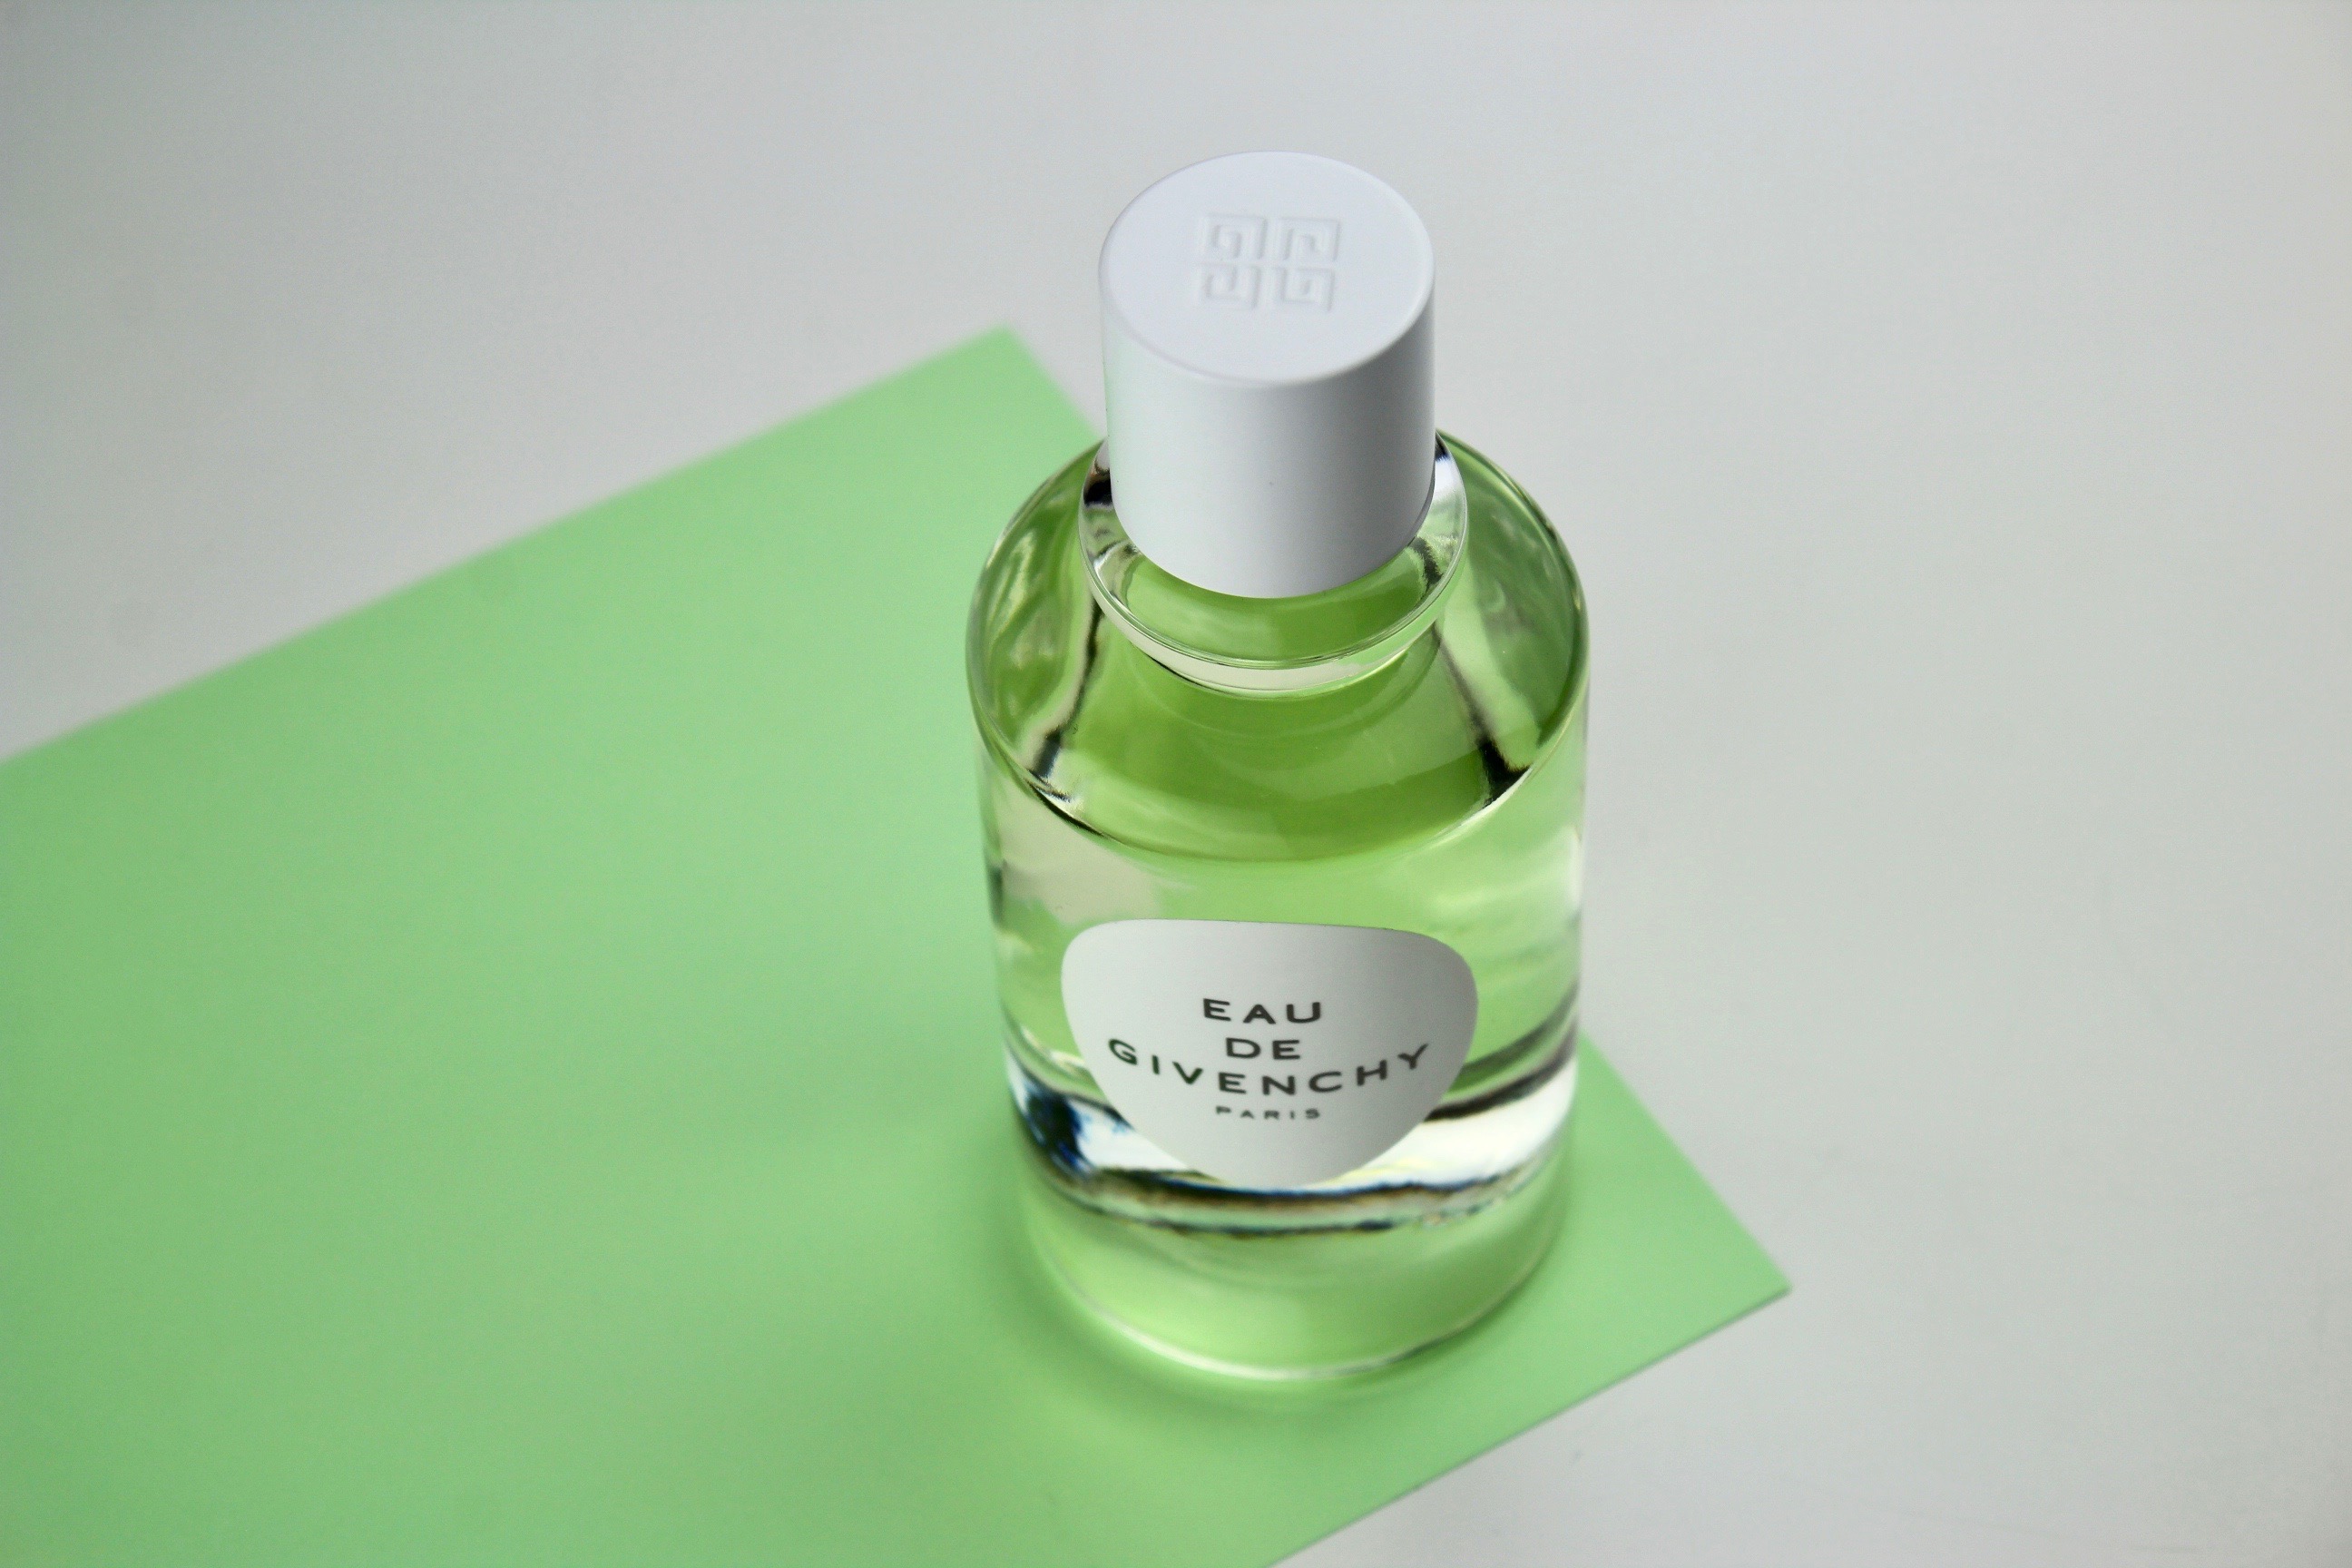 givenchy green bottle